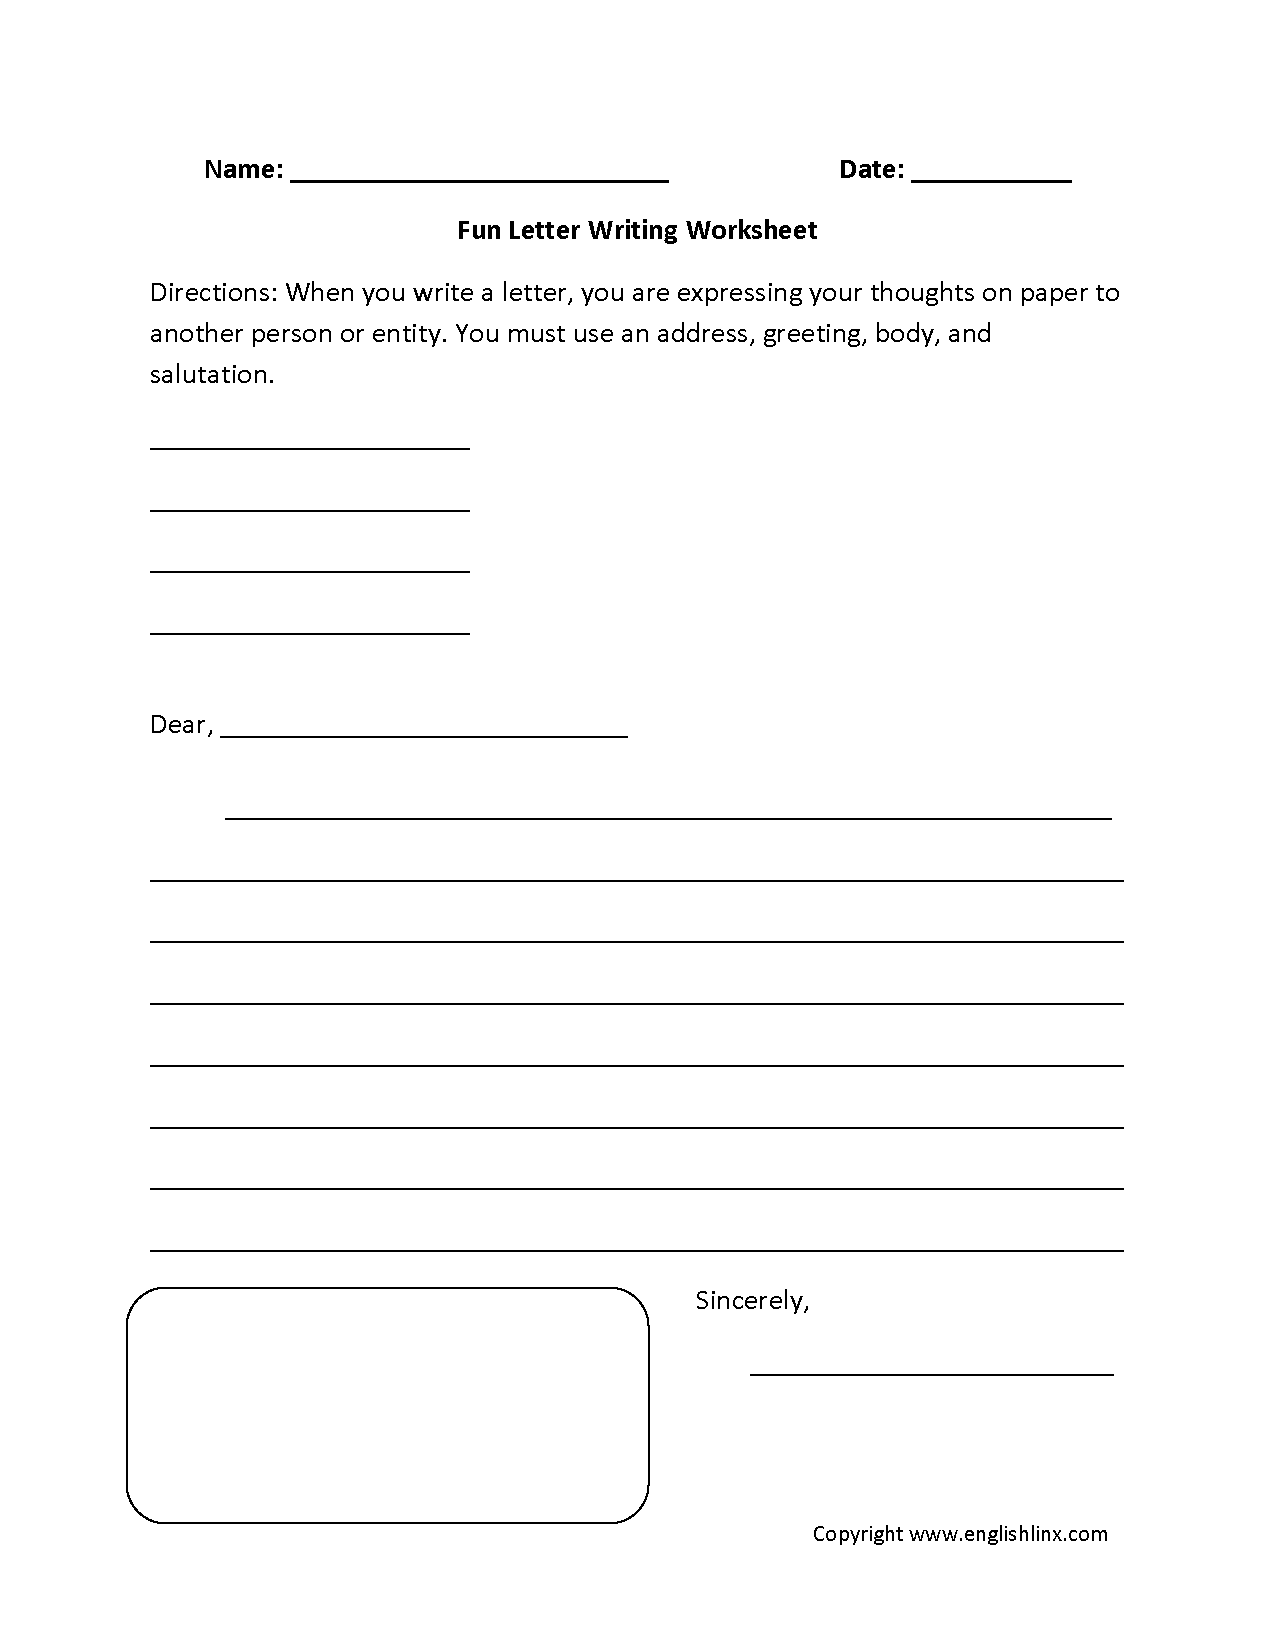 Fun Letter Writing Worksheets